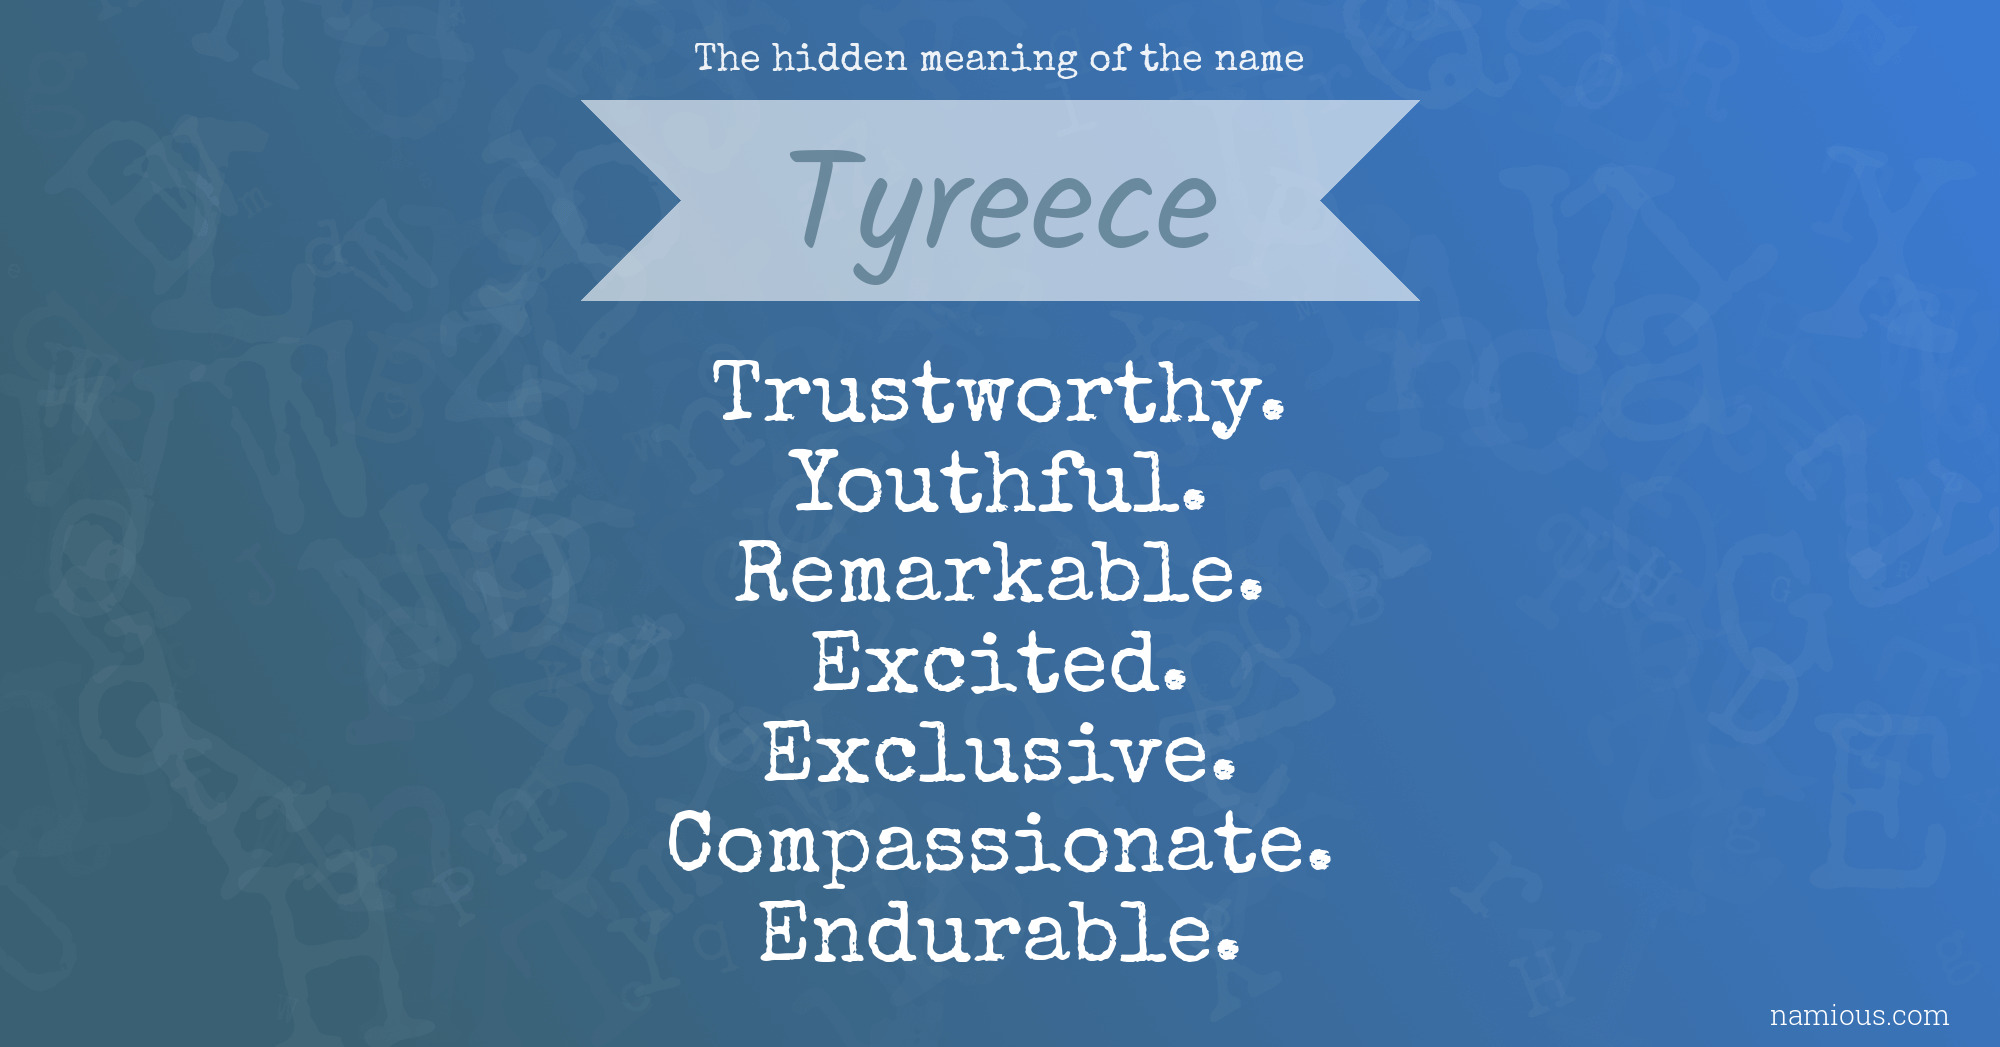 The hidden meaning of the name Tyreece